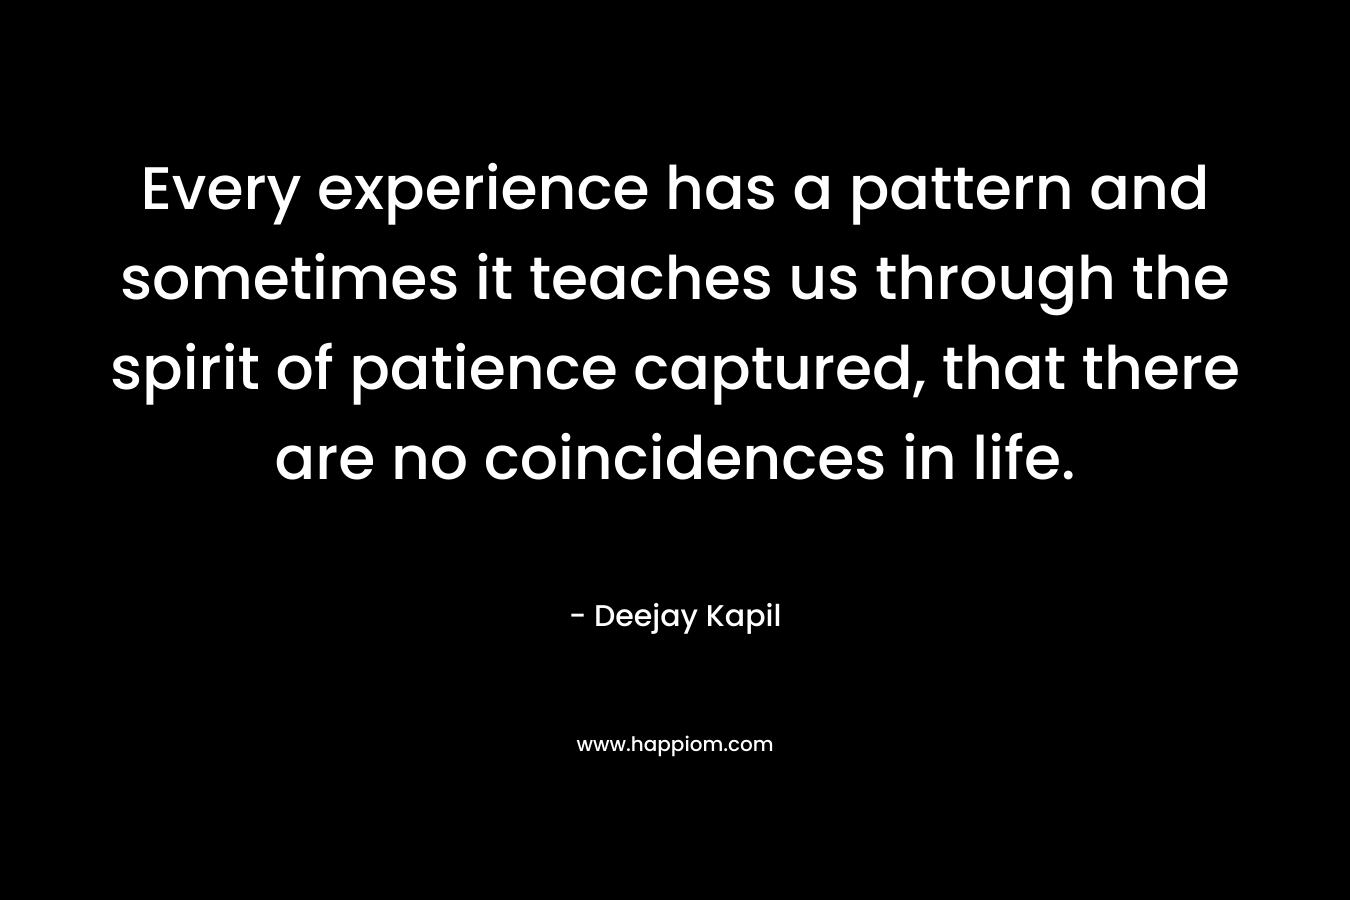 Every experience has a pattern and sometimes it teaches us through the spirit of patience captured, that there are no coincidences in life. – Deejay Kapil